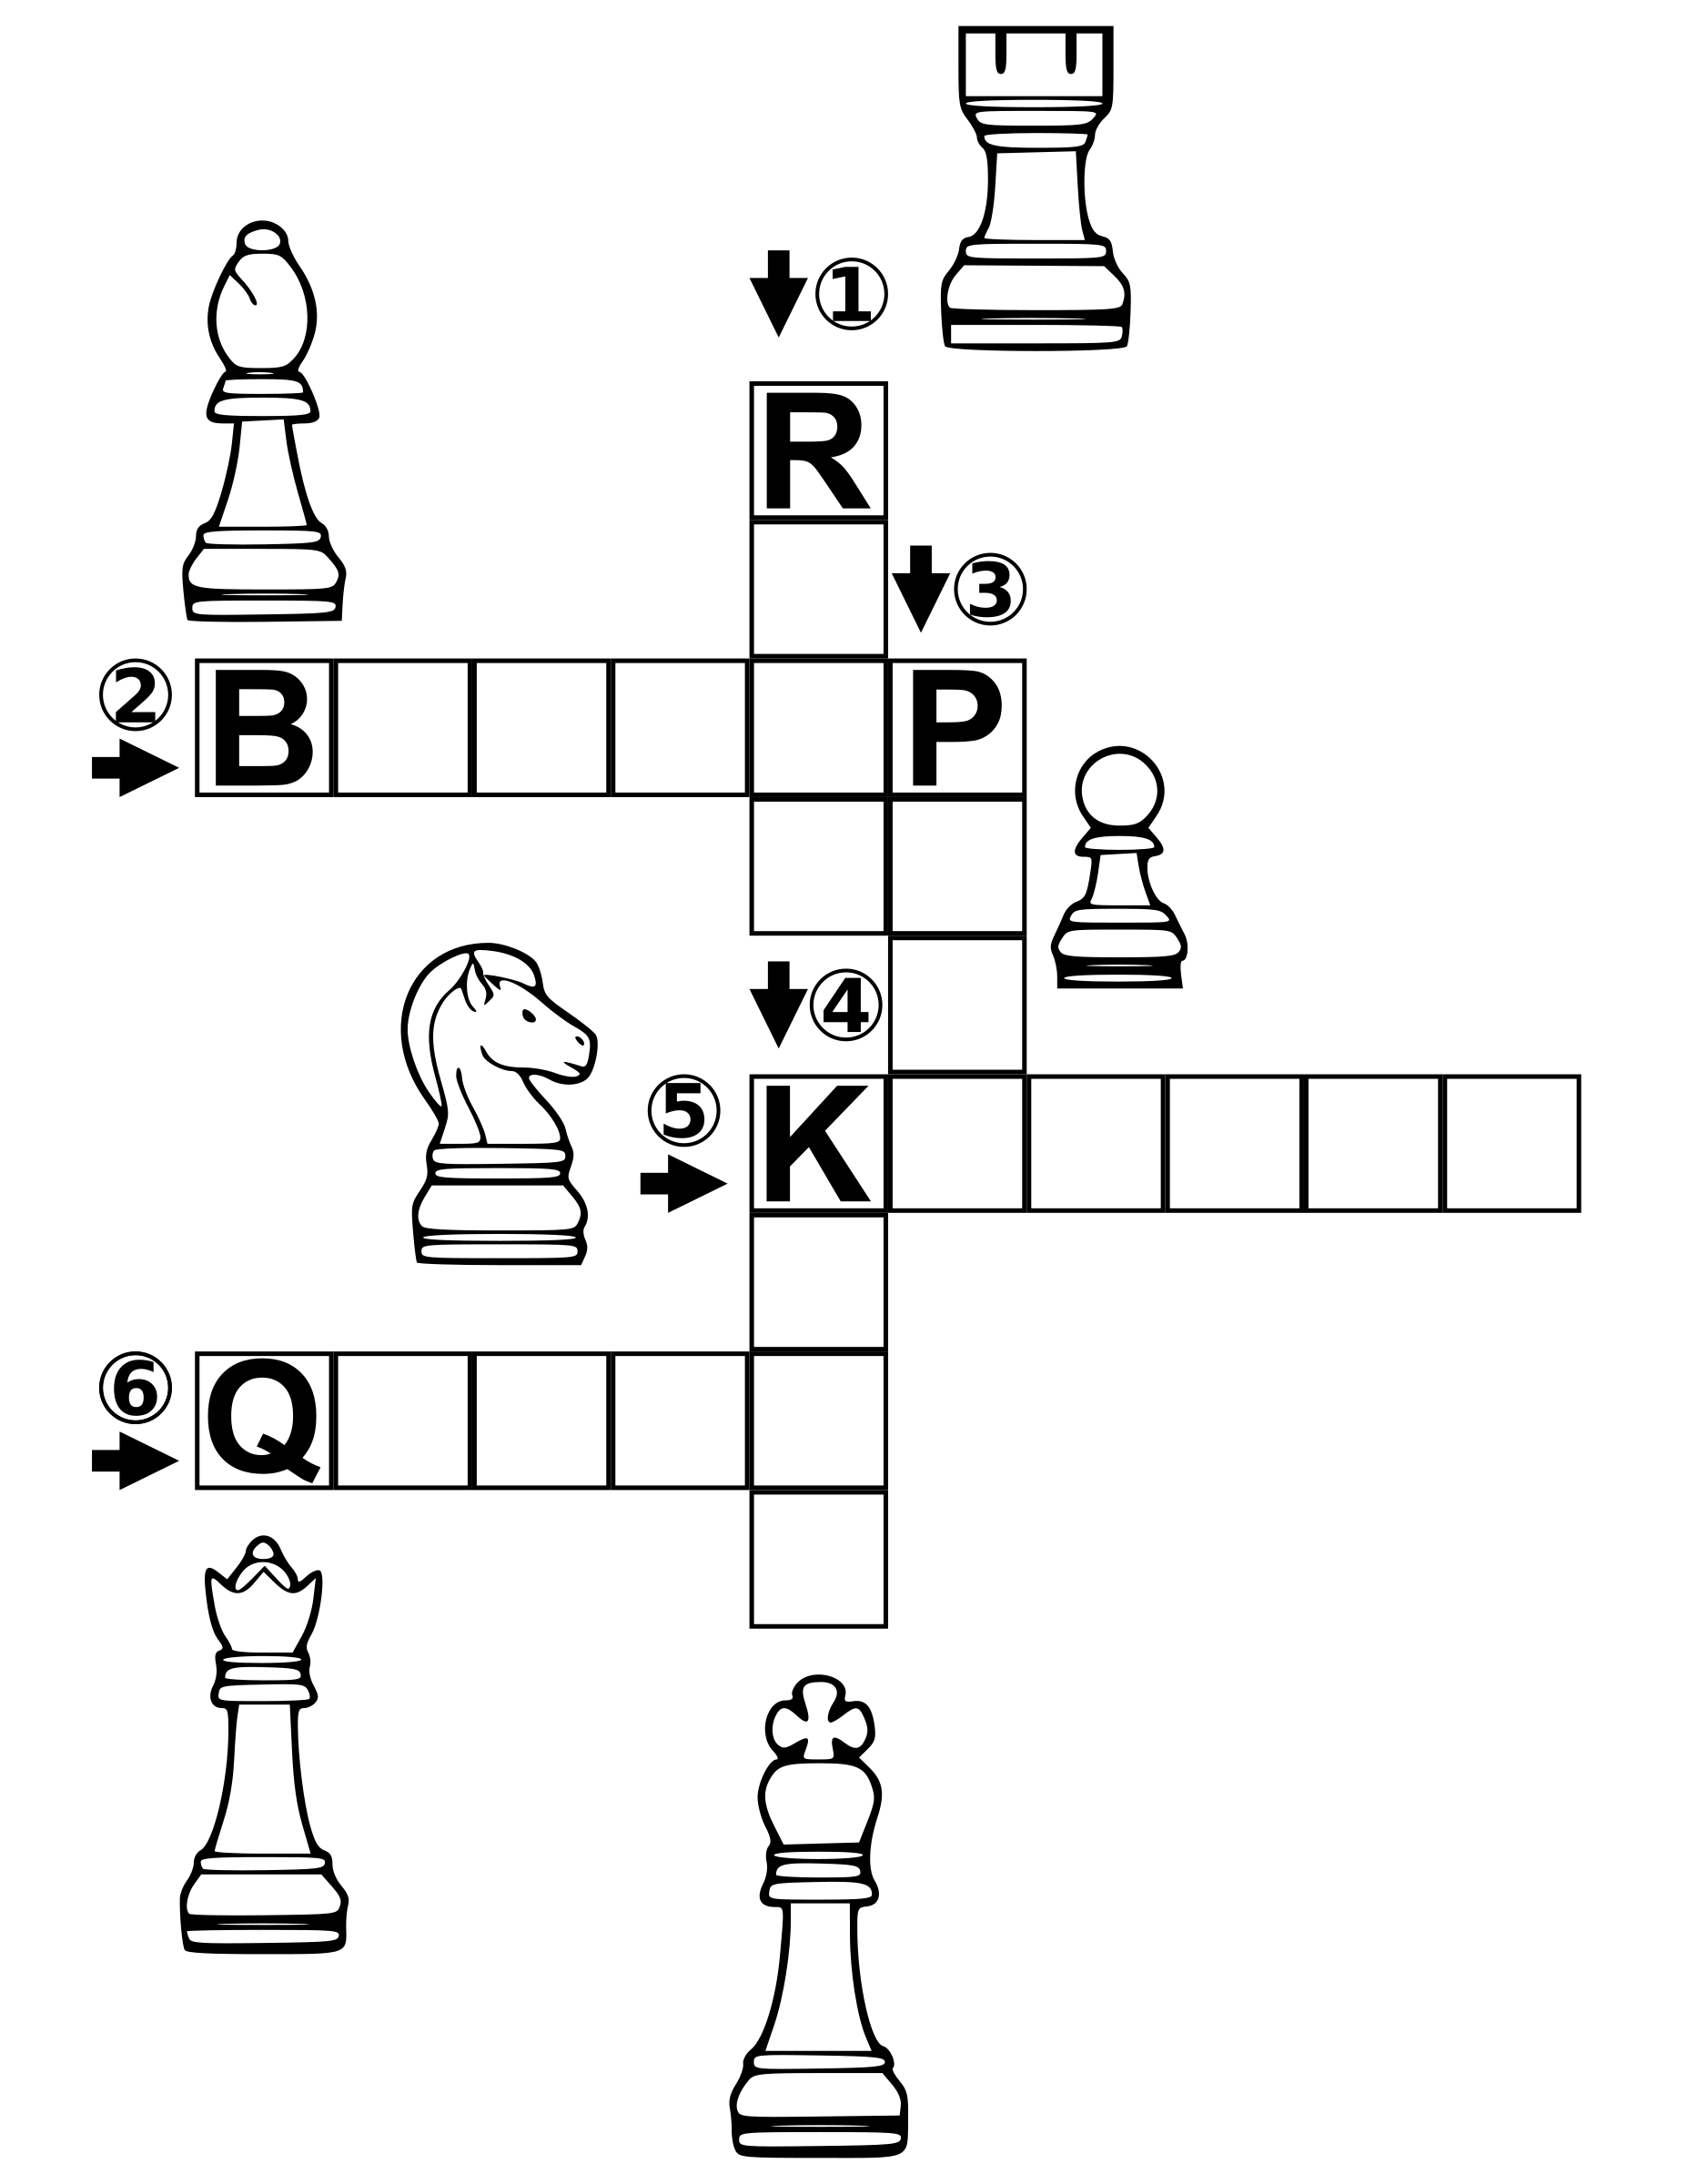 Chess Crossword Puzzle | Free Printable Puzzle Games - Printable Chess Puzzles